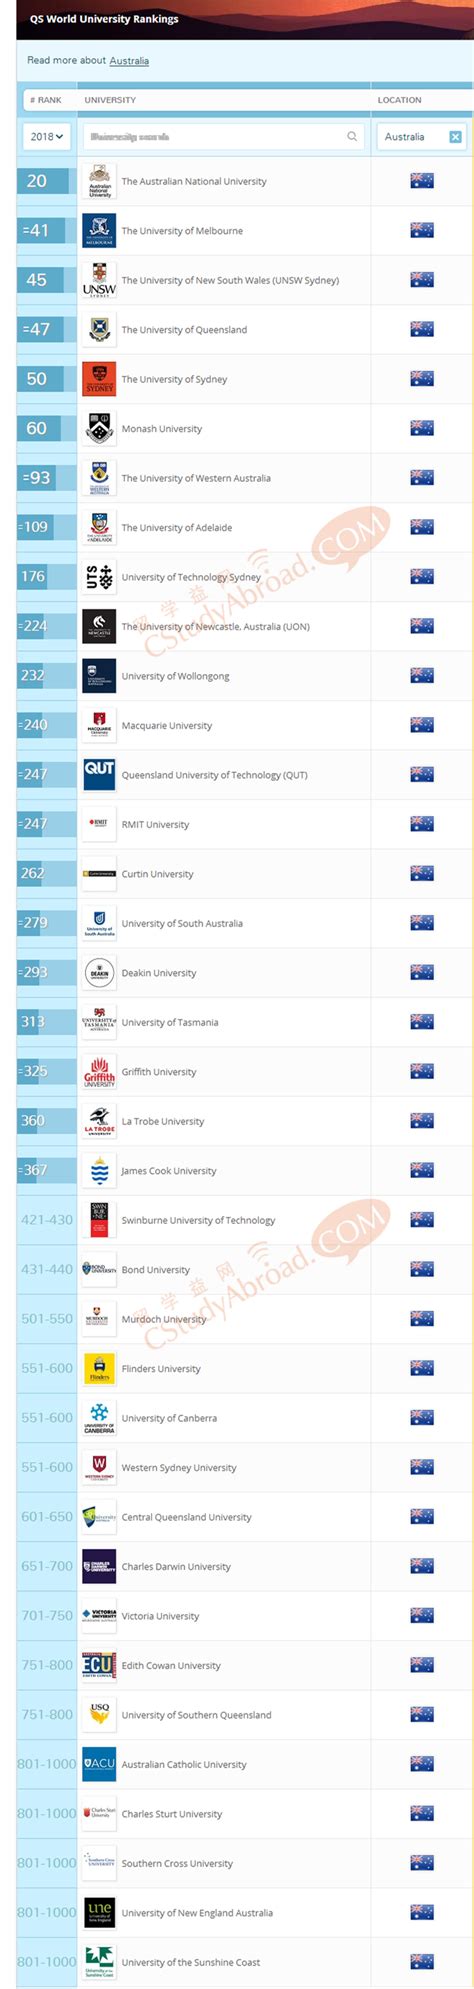 Elsewhere in the world, chinese universities are continuing to perform well and are increasingly receiving high scores for their research impact. 2018QS世界大学排名火热出炉，澳洲排名强势上升! | 免费申请澳洲学校和签证-留学益网